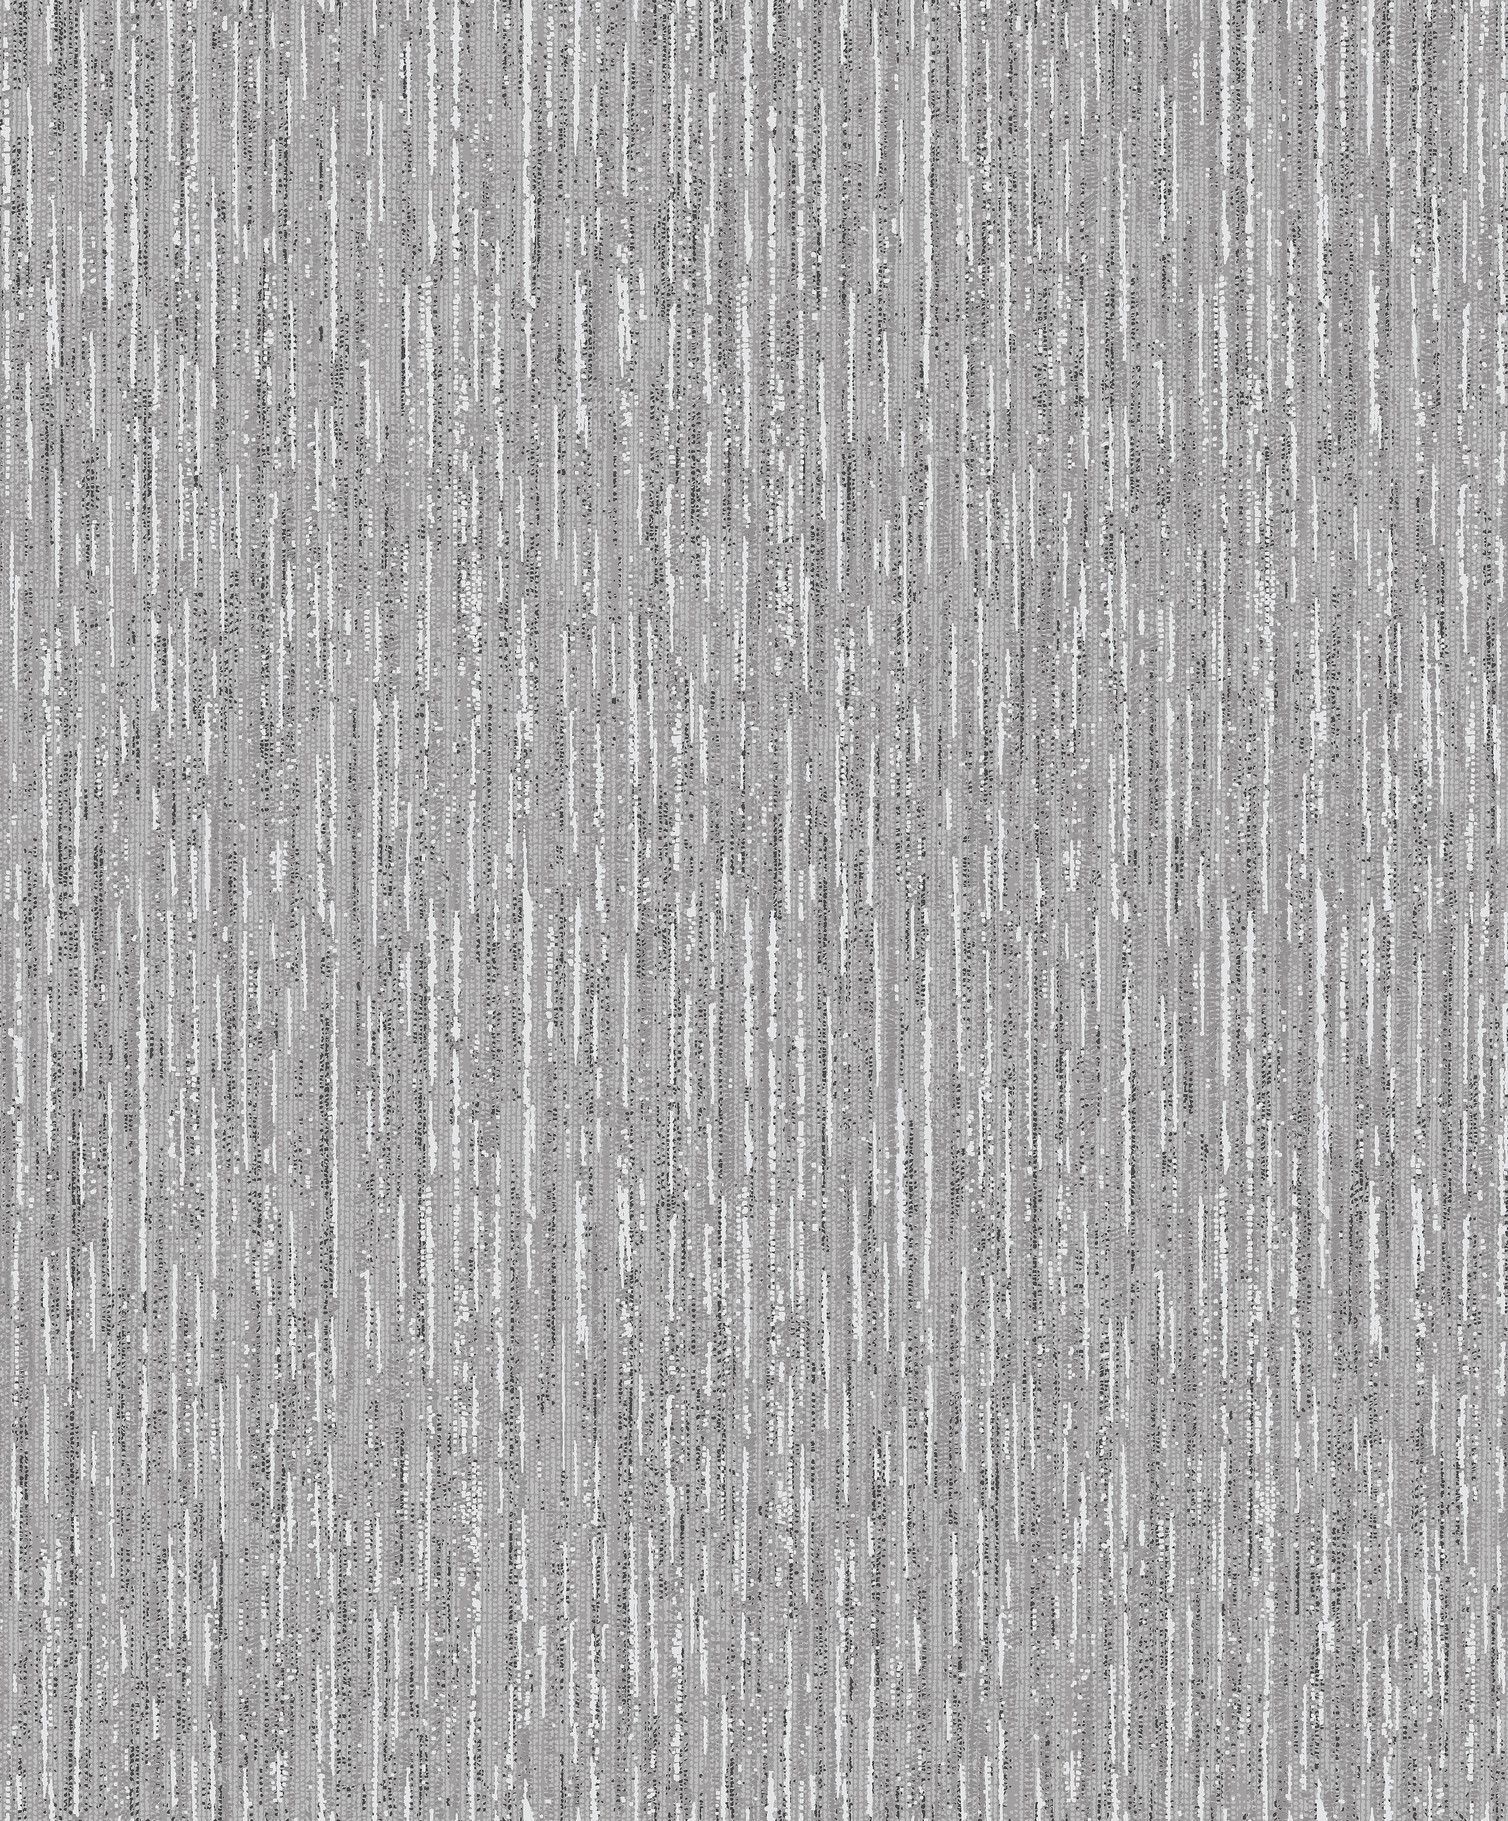 Crown Grey Charcoal Shimmer Plain Wallpaper Distressed Effect Textured Vinyl 